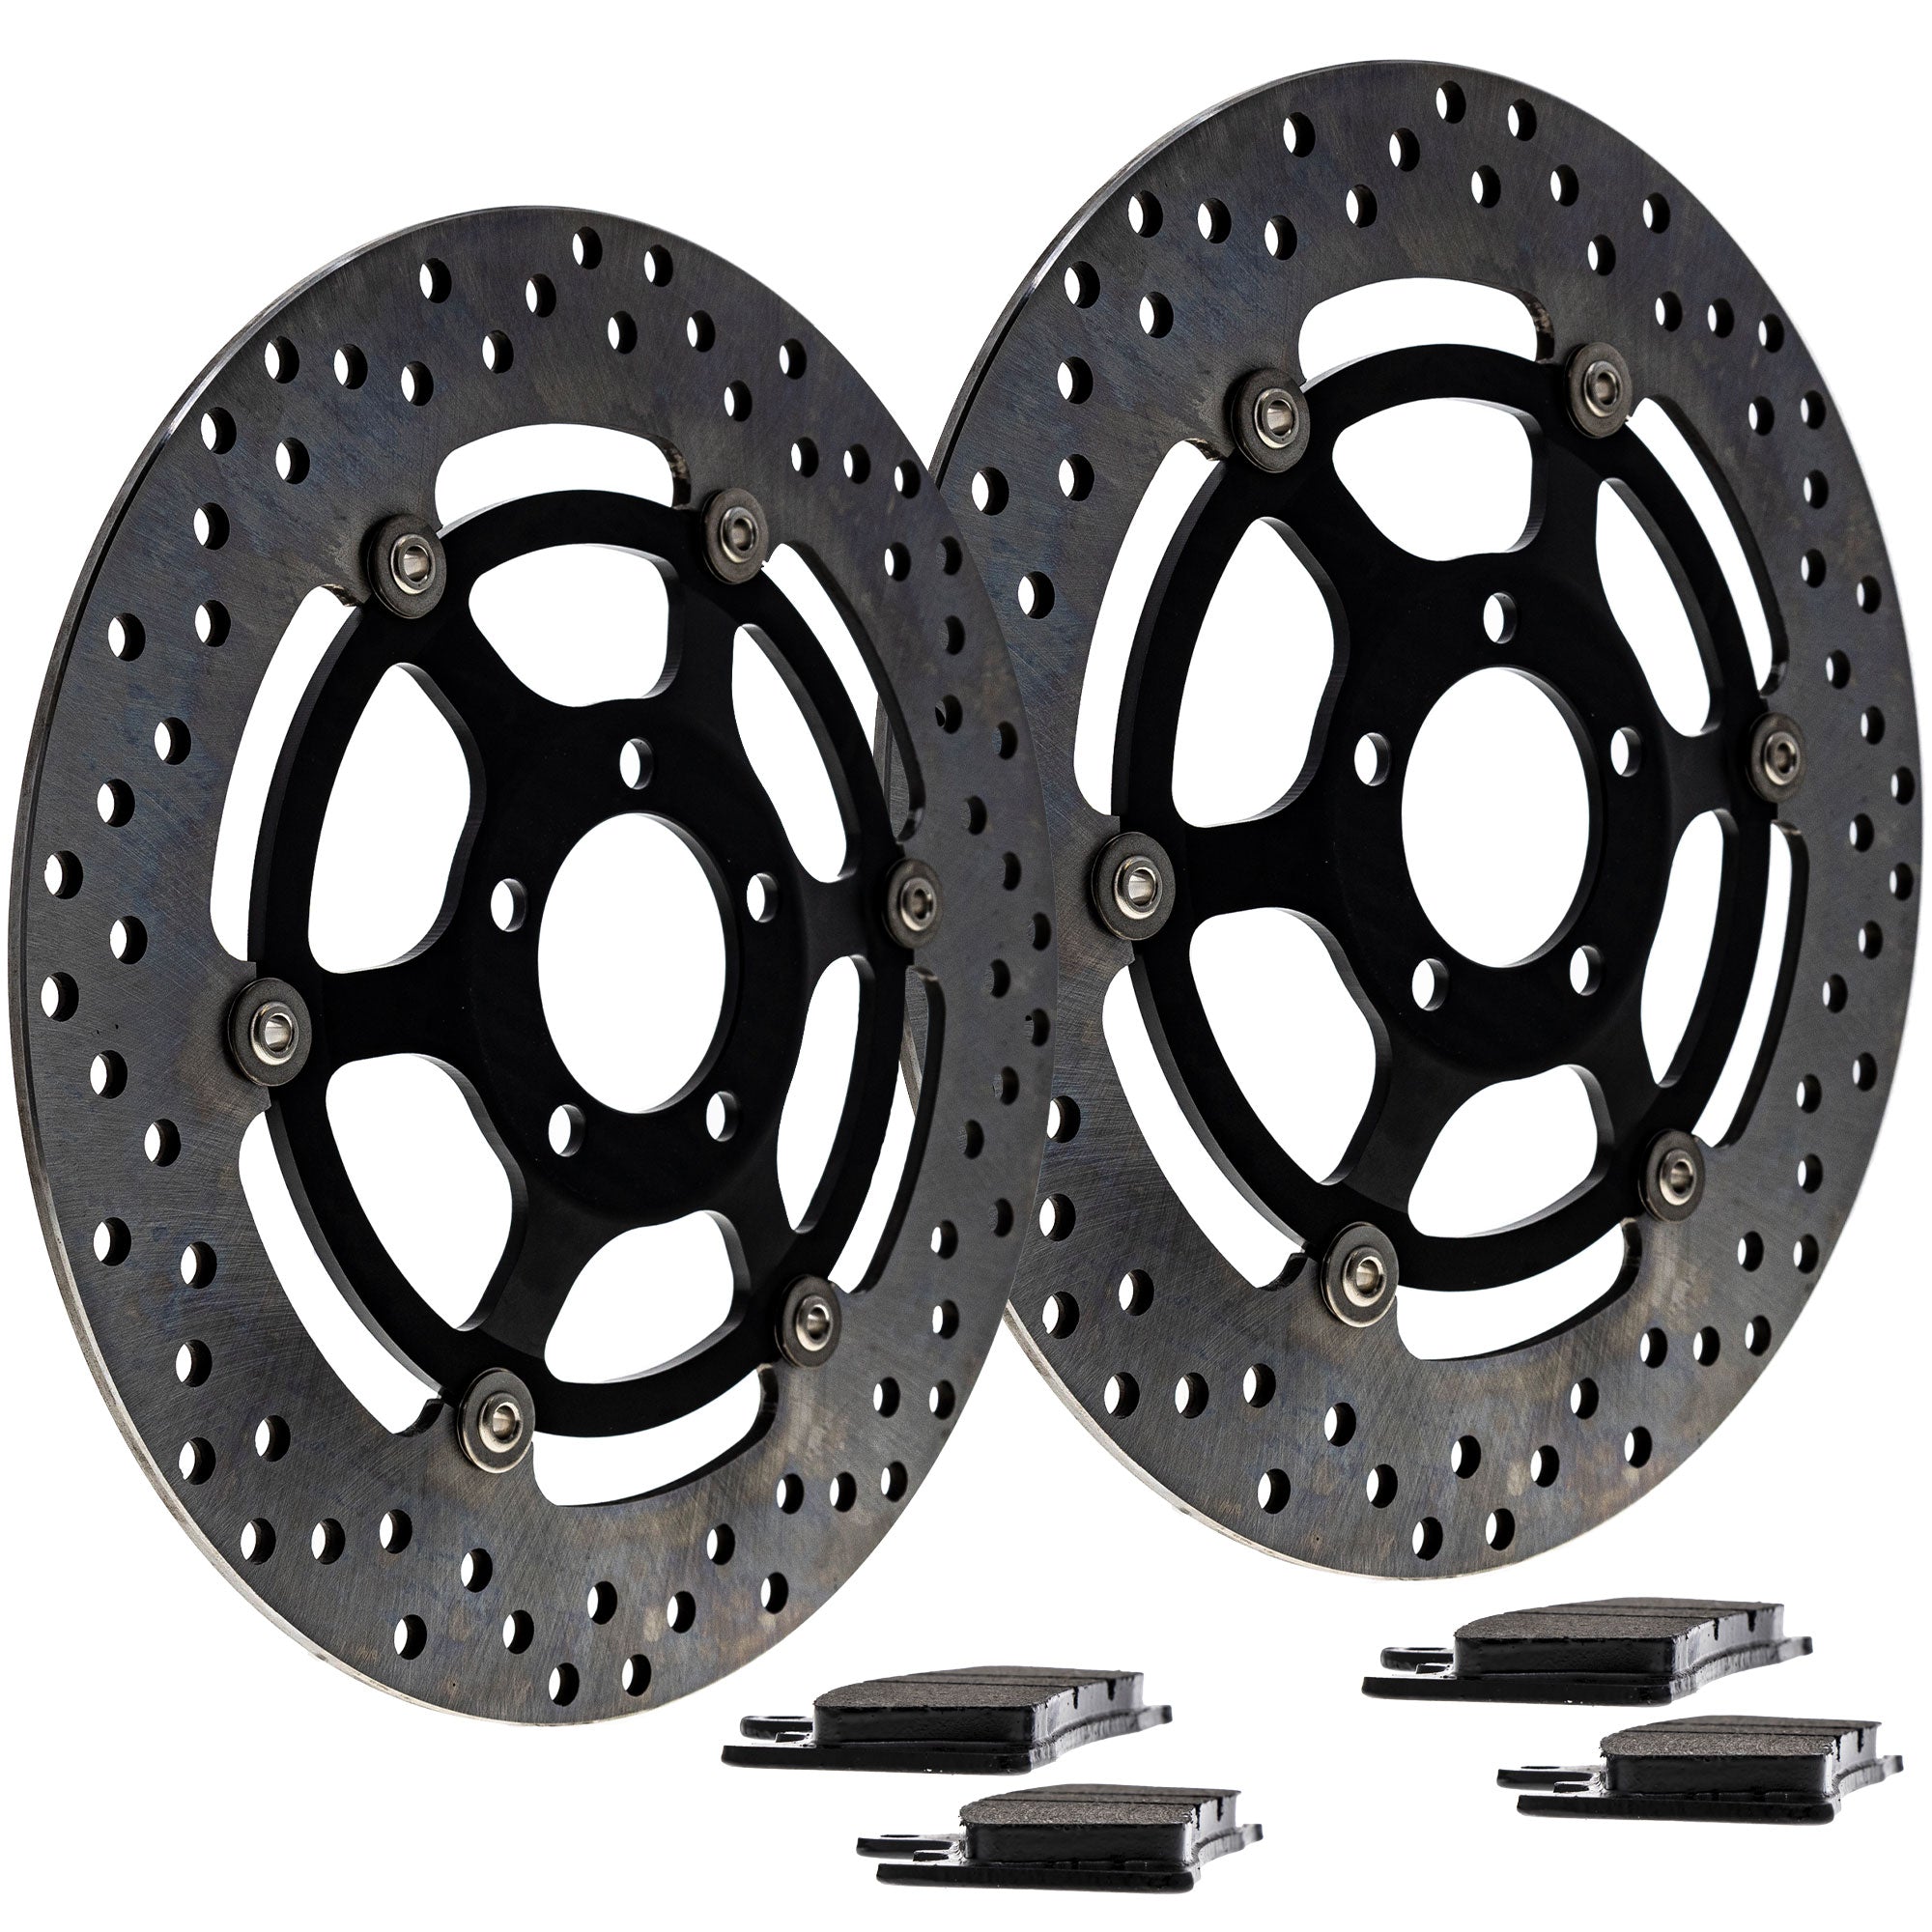 Complete Front or Rear Pad and Rotor Set for zOTHER Triumph KTM ZRX1200R ZRX1100 Ninja NICHE MK1006677